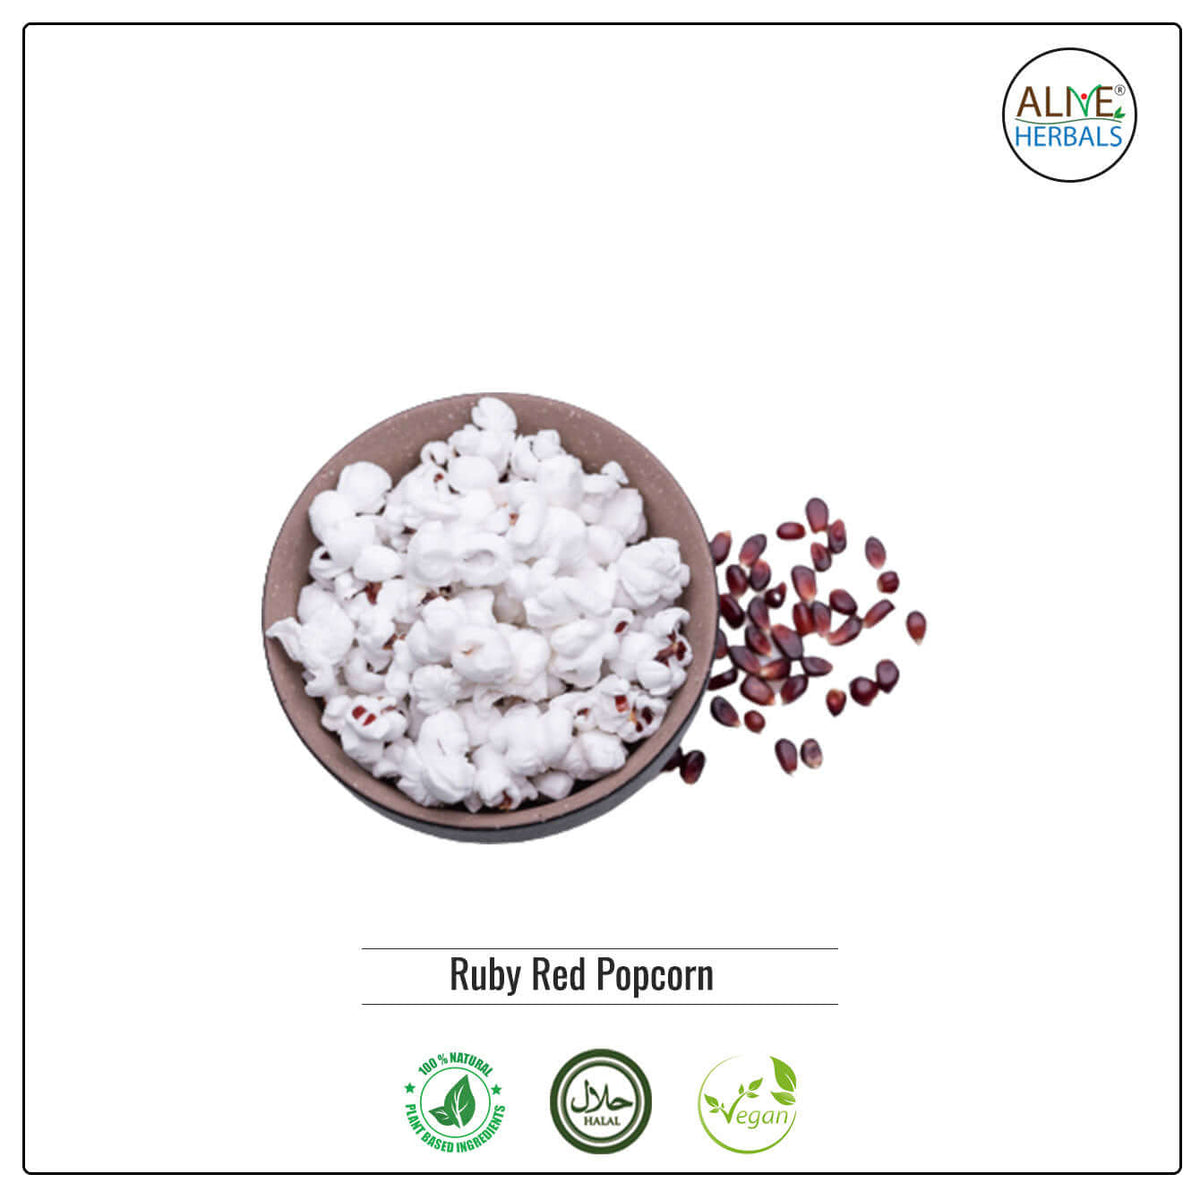 Ruby Red Popcorn - Shop at Natural Food Store | Alive Herbals.